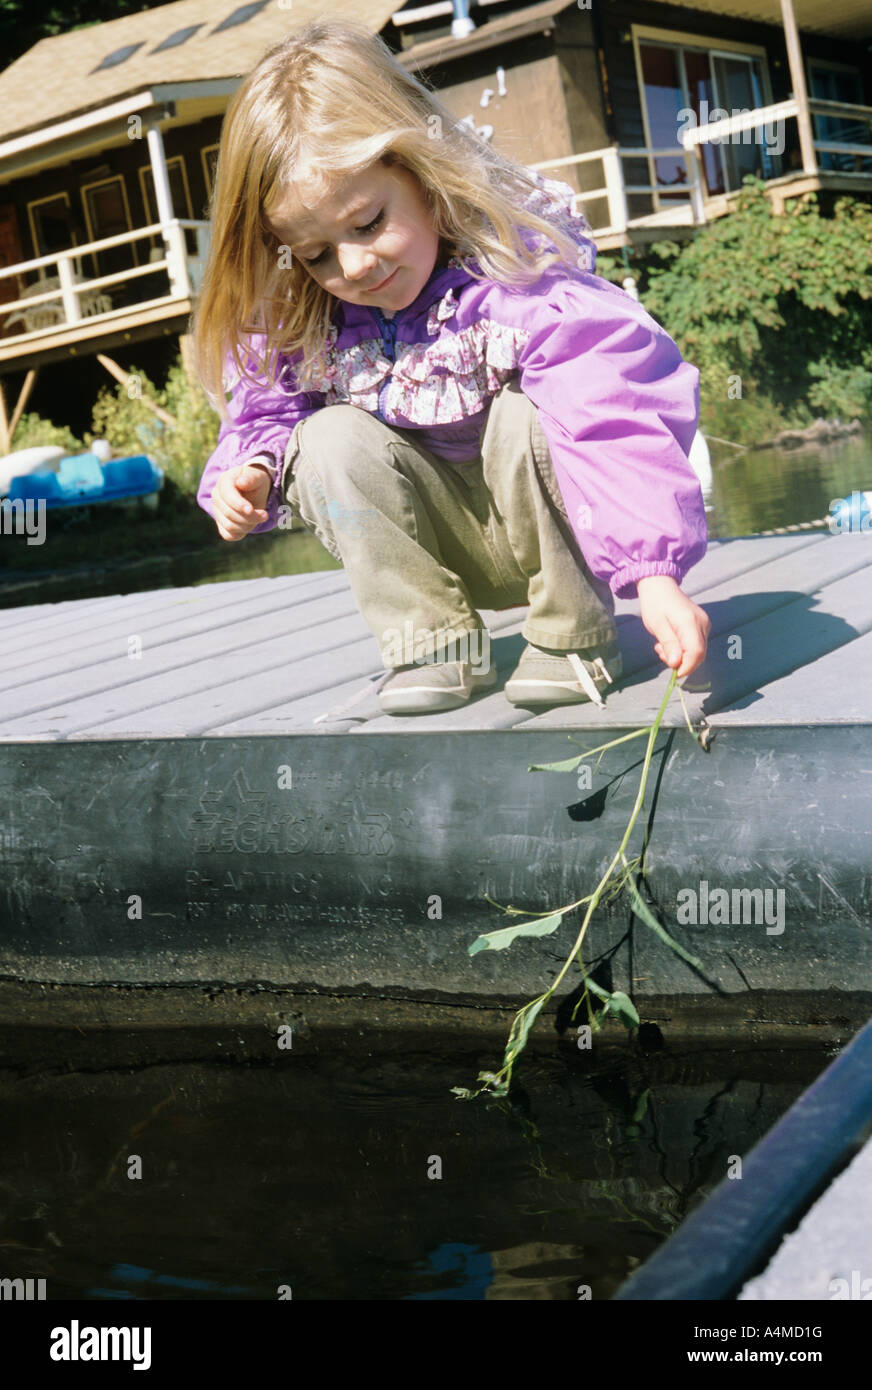 GIRL (APP. 3-5 YRS.) DIPPING BRANCH IN WATER Stock Photo